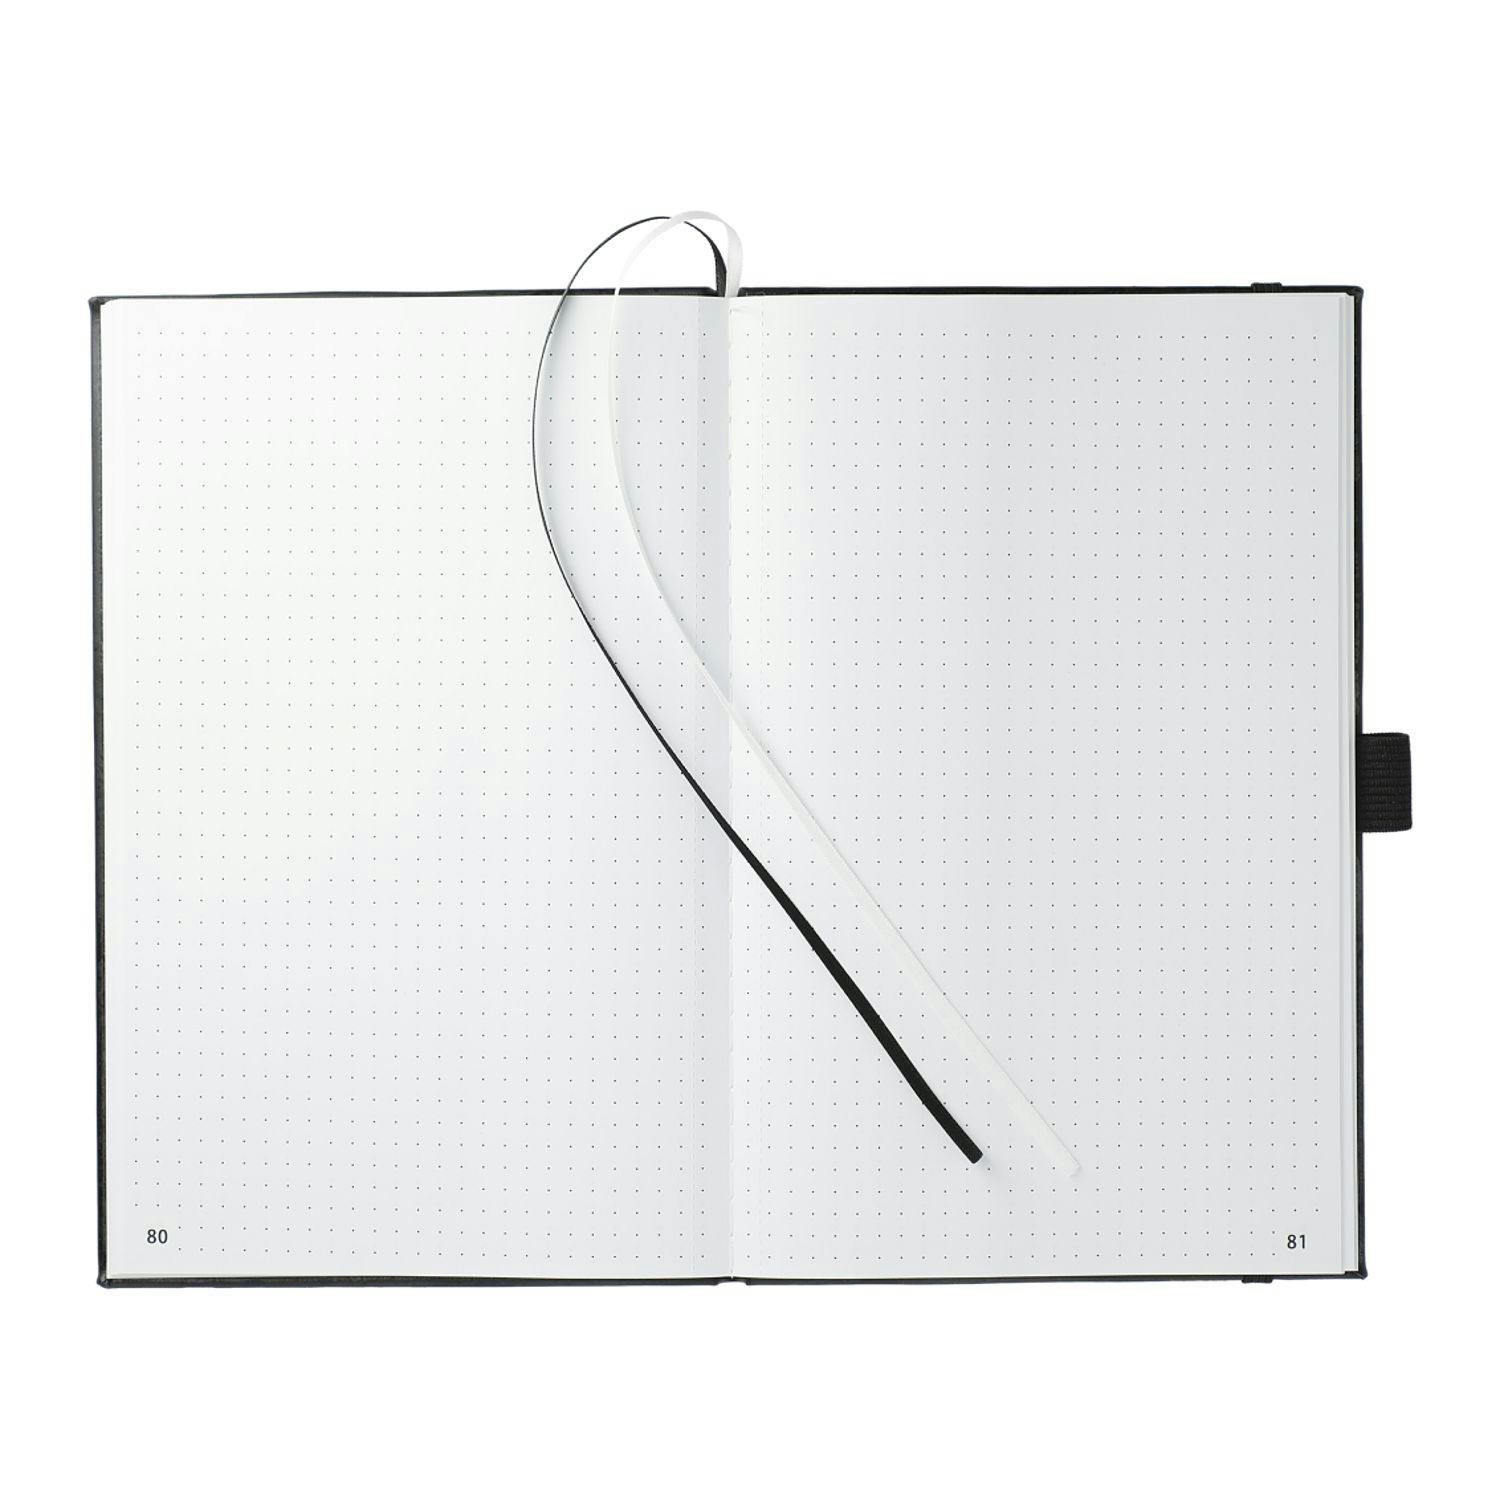 5.5" x 8.5" FUNCTION Bulleting Notebook - additional Image 2